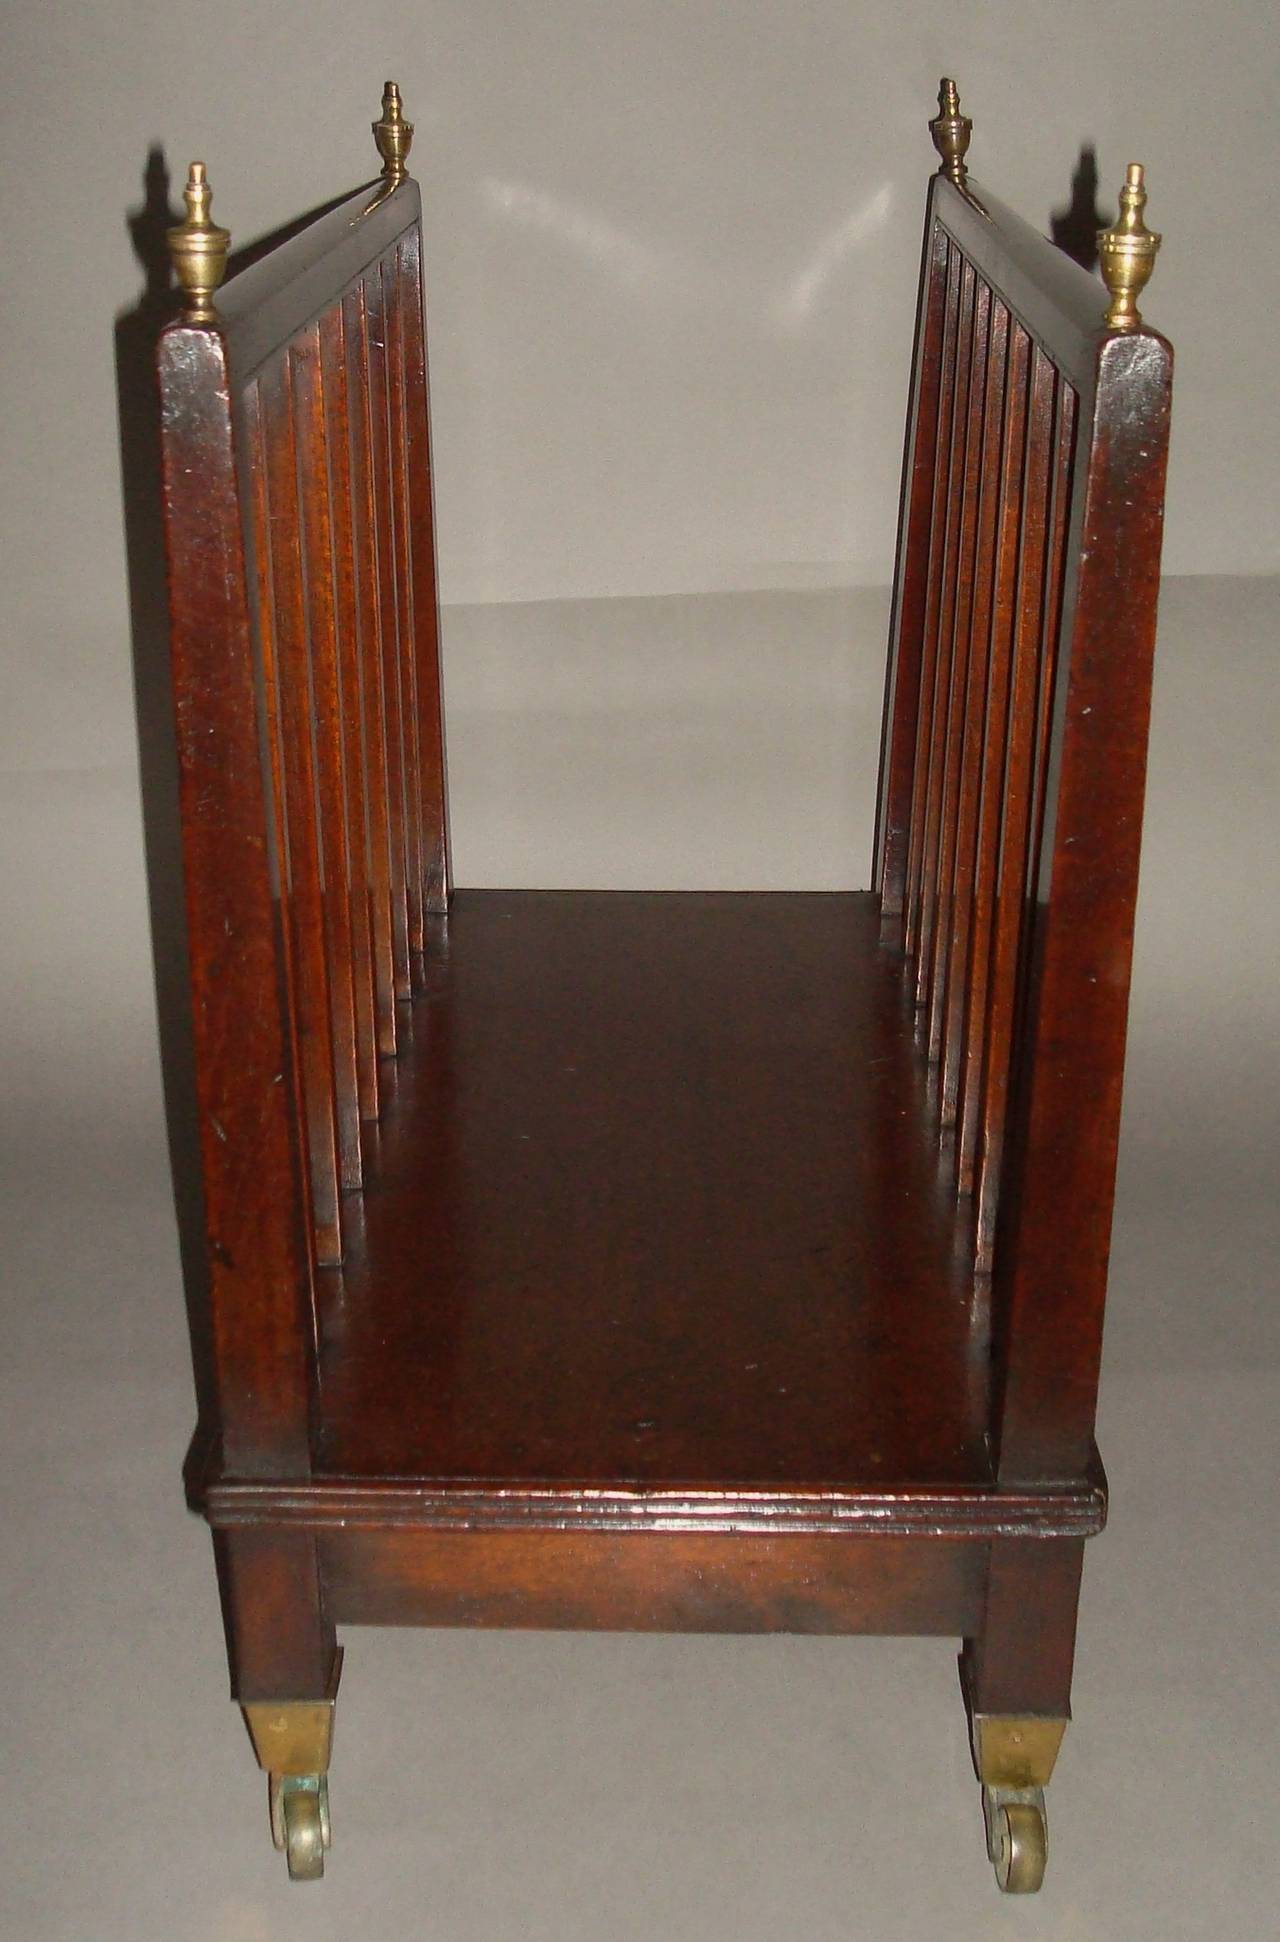 Unusual Regency Mahogany Canterbury / Folio Stand In Excellent Condition For Sale In Moreton-in-Marsh, Gloucestershire